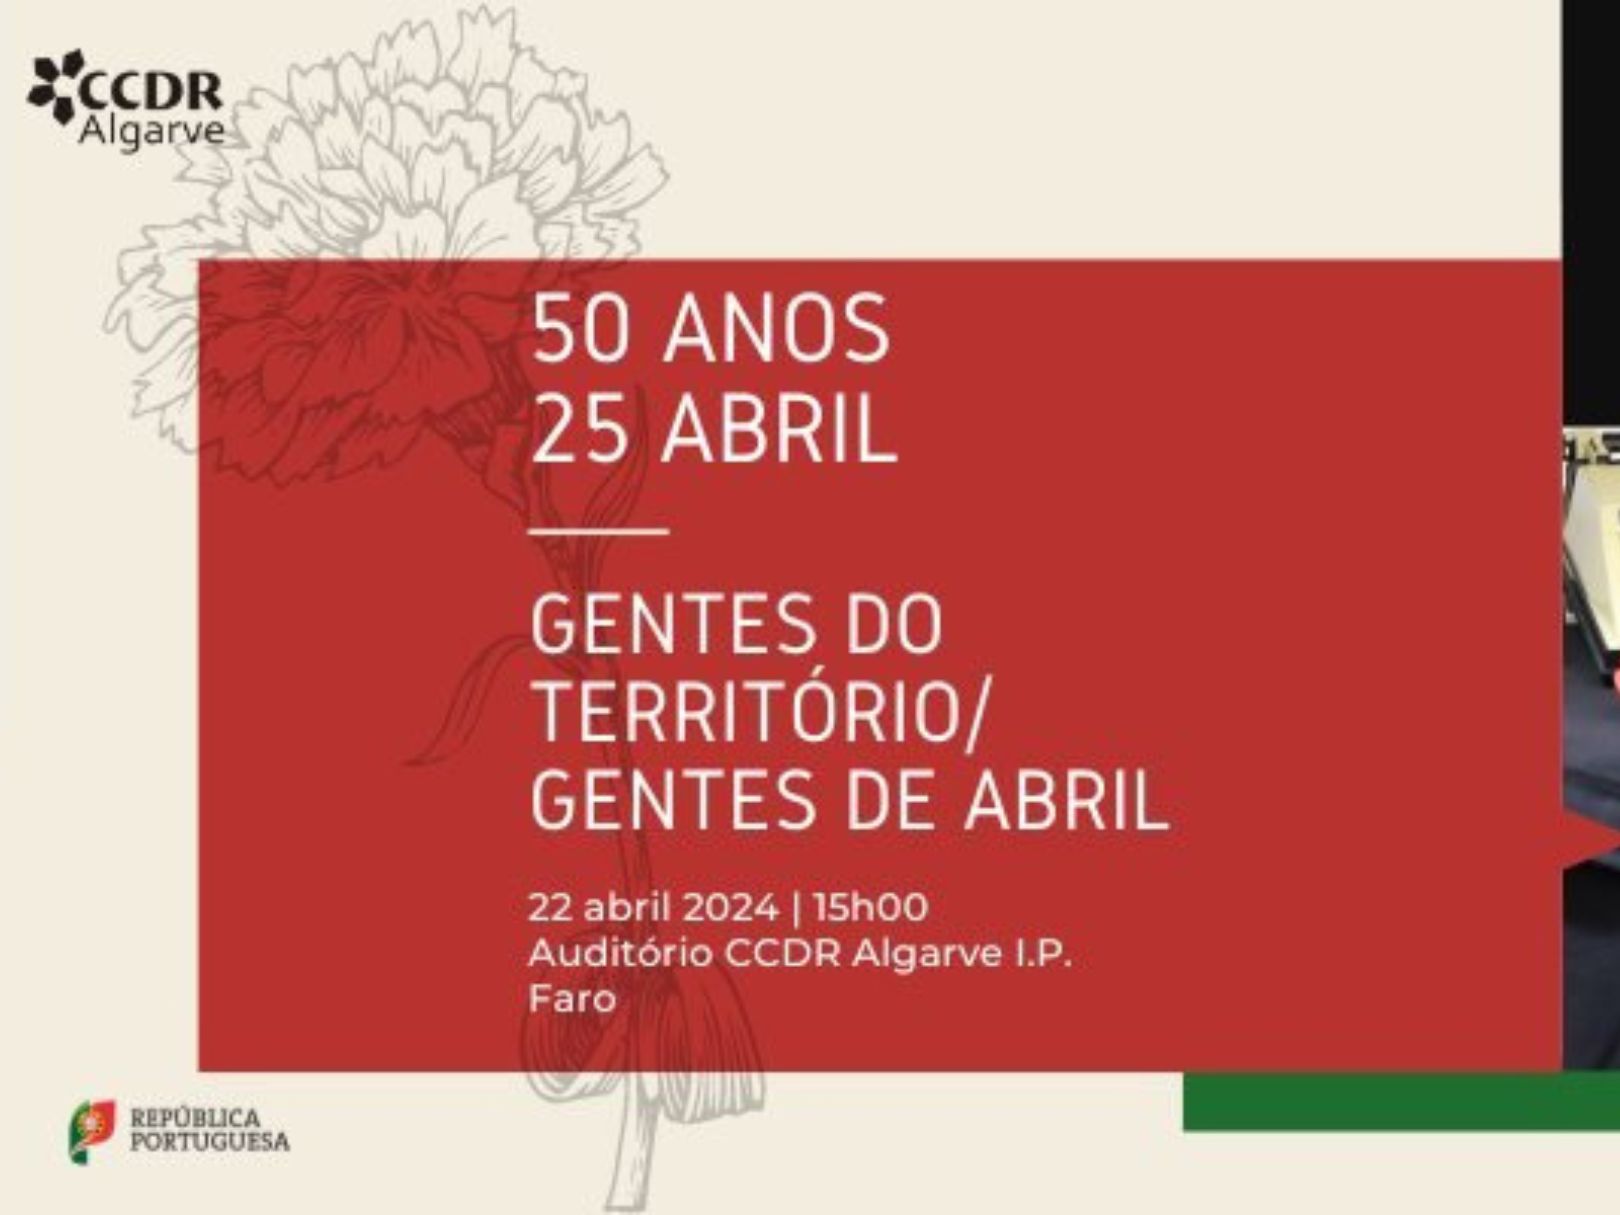 CIAC joins the “People of the Territory, People of April” initiative by CCDR Algarve.